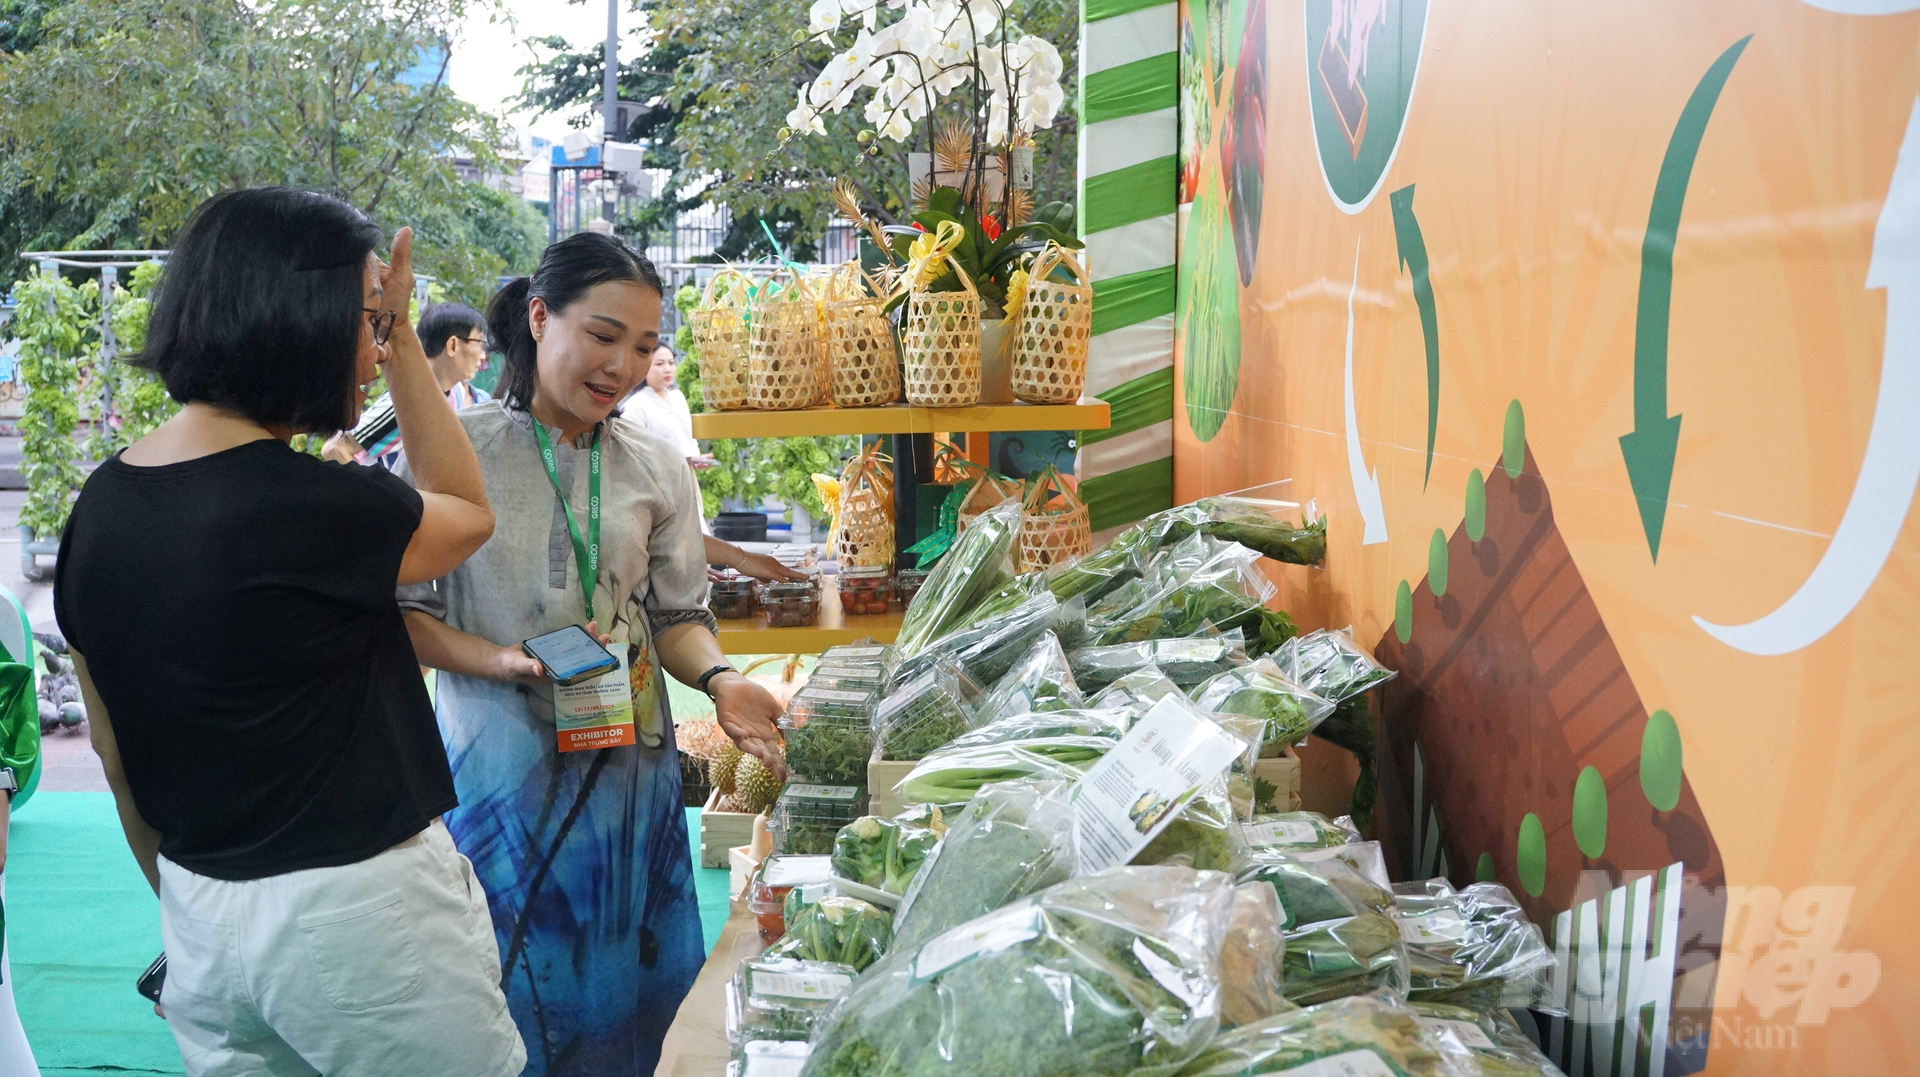 Tam Nong Agricultural Cooperative (Lam Dong) brought organic products grown in Lam Dong to introduce and display at the exhibition. Photo: Nguyen Thuy.